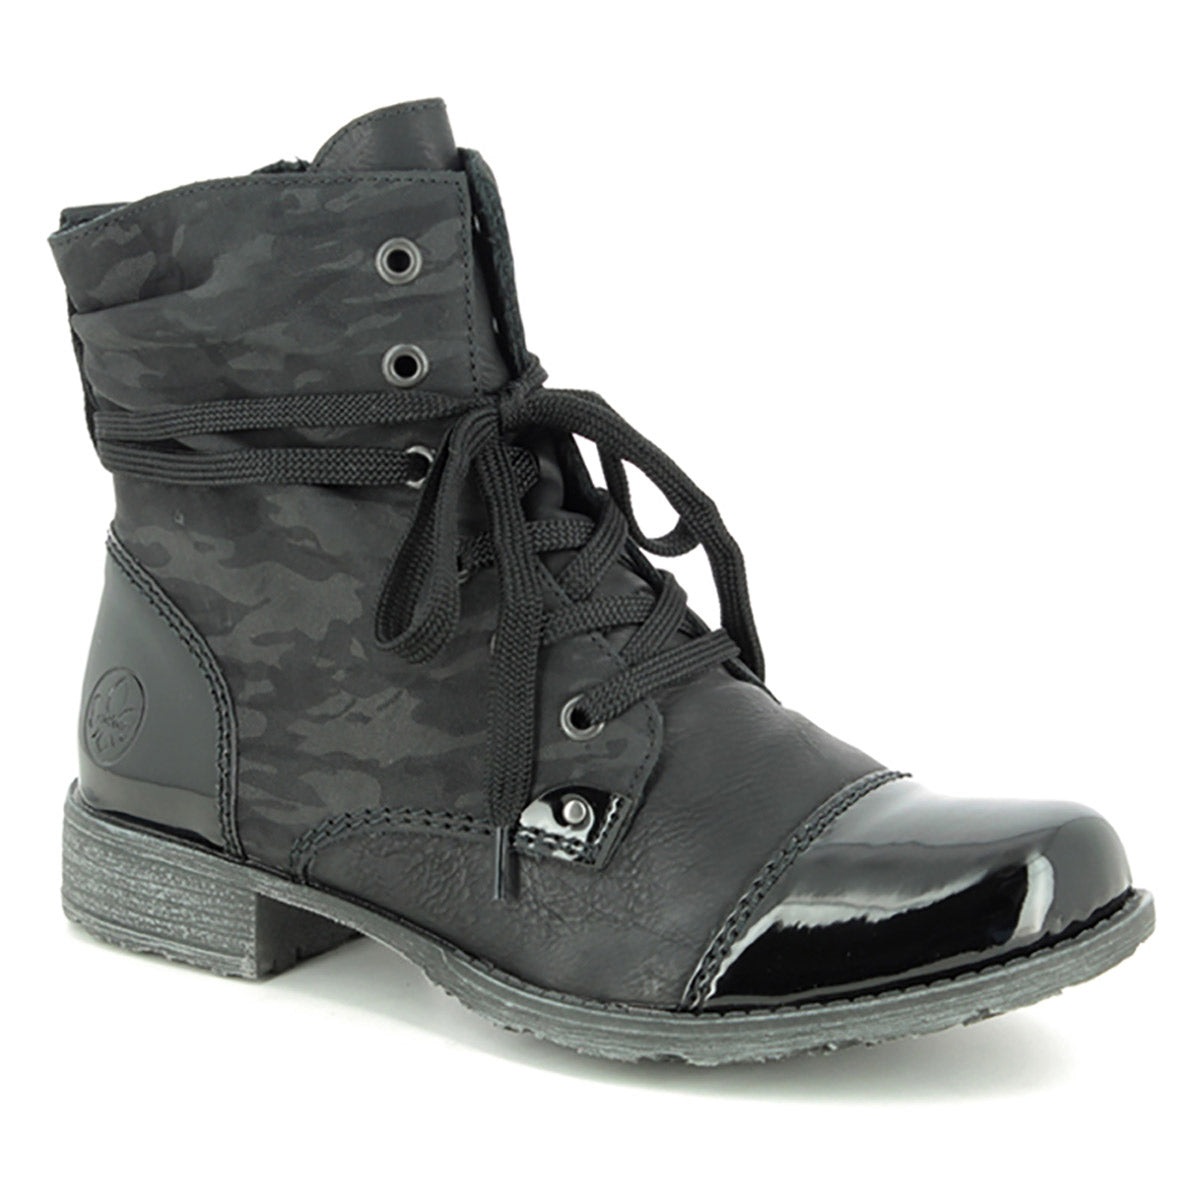 Rieker Lace Up Bootie: Black Camo Print ankle boot with a camouflage fabric shaft and a patent leather toe cap.